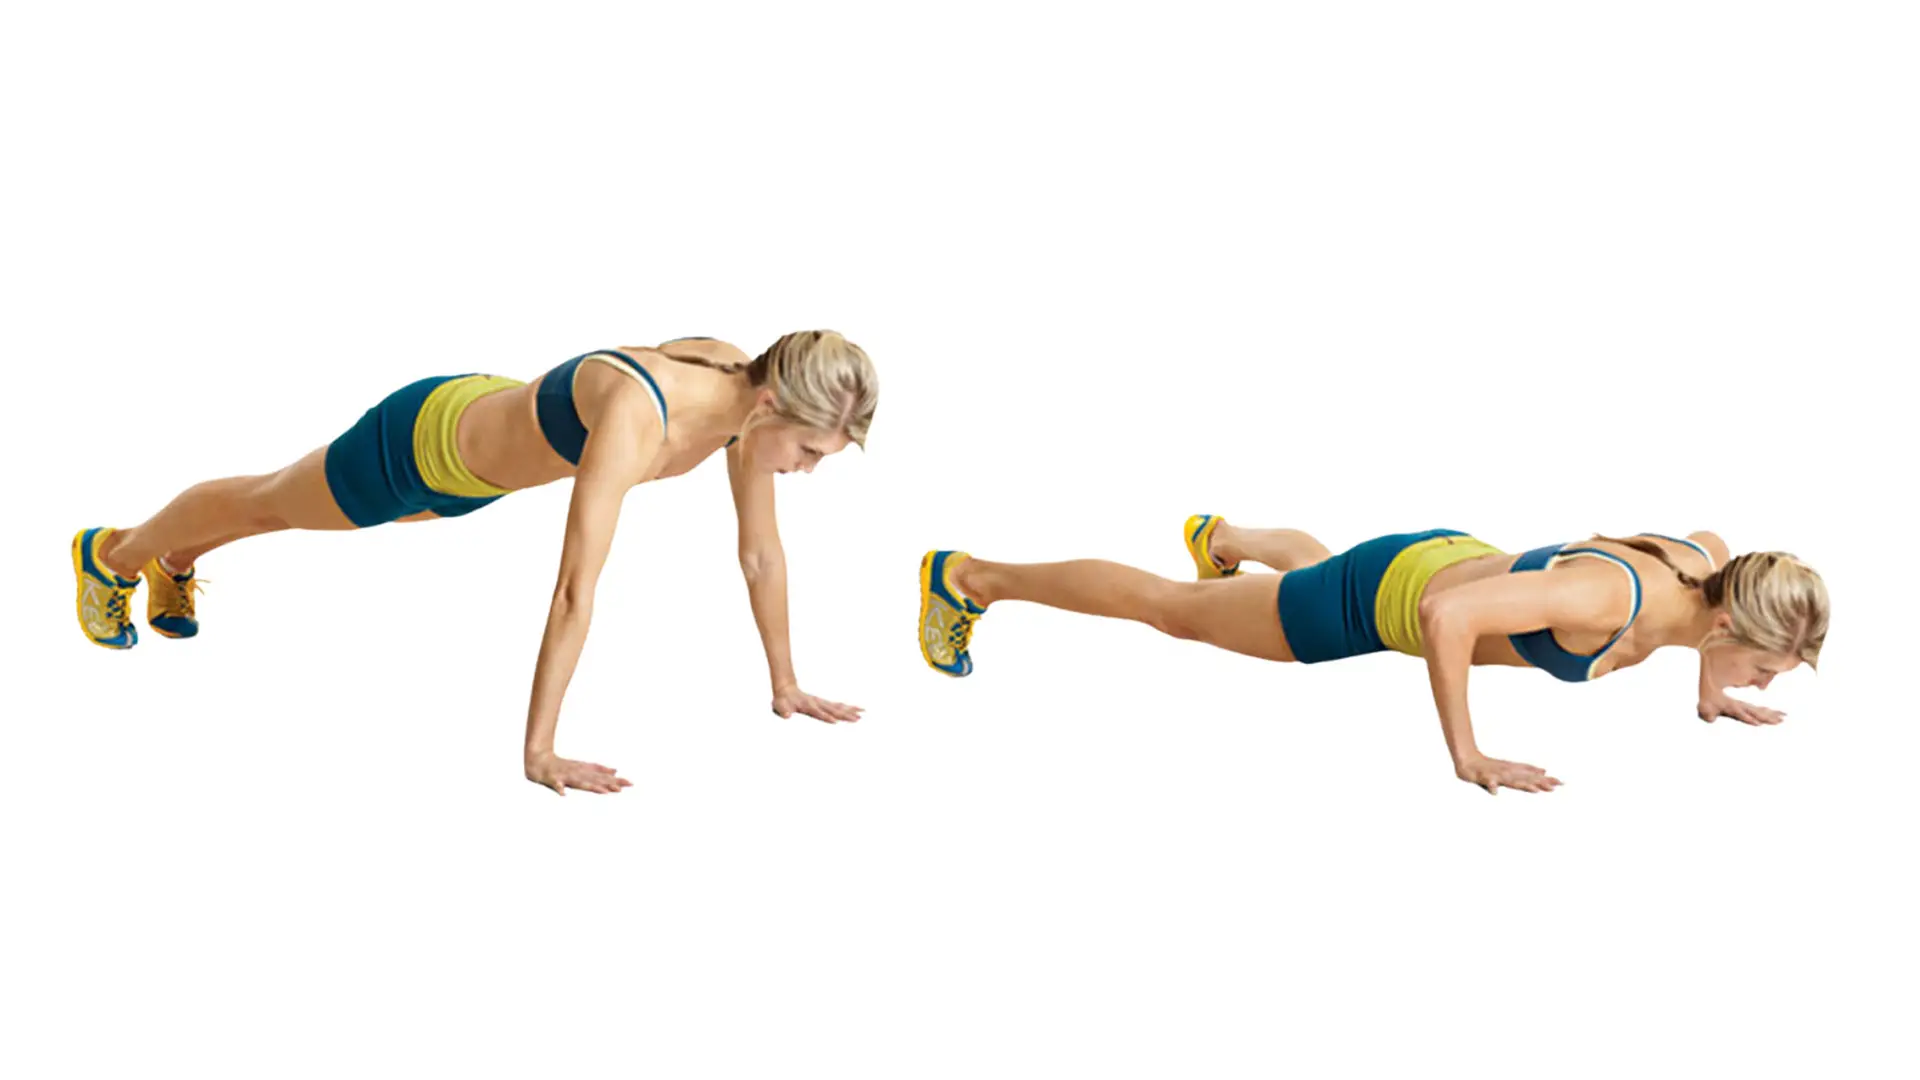 The combination of jumping and pushup is one of the workouts